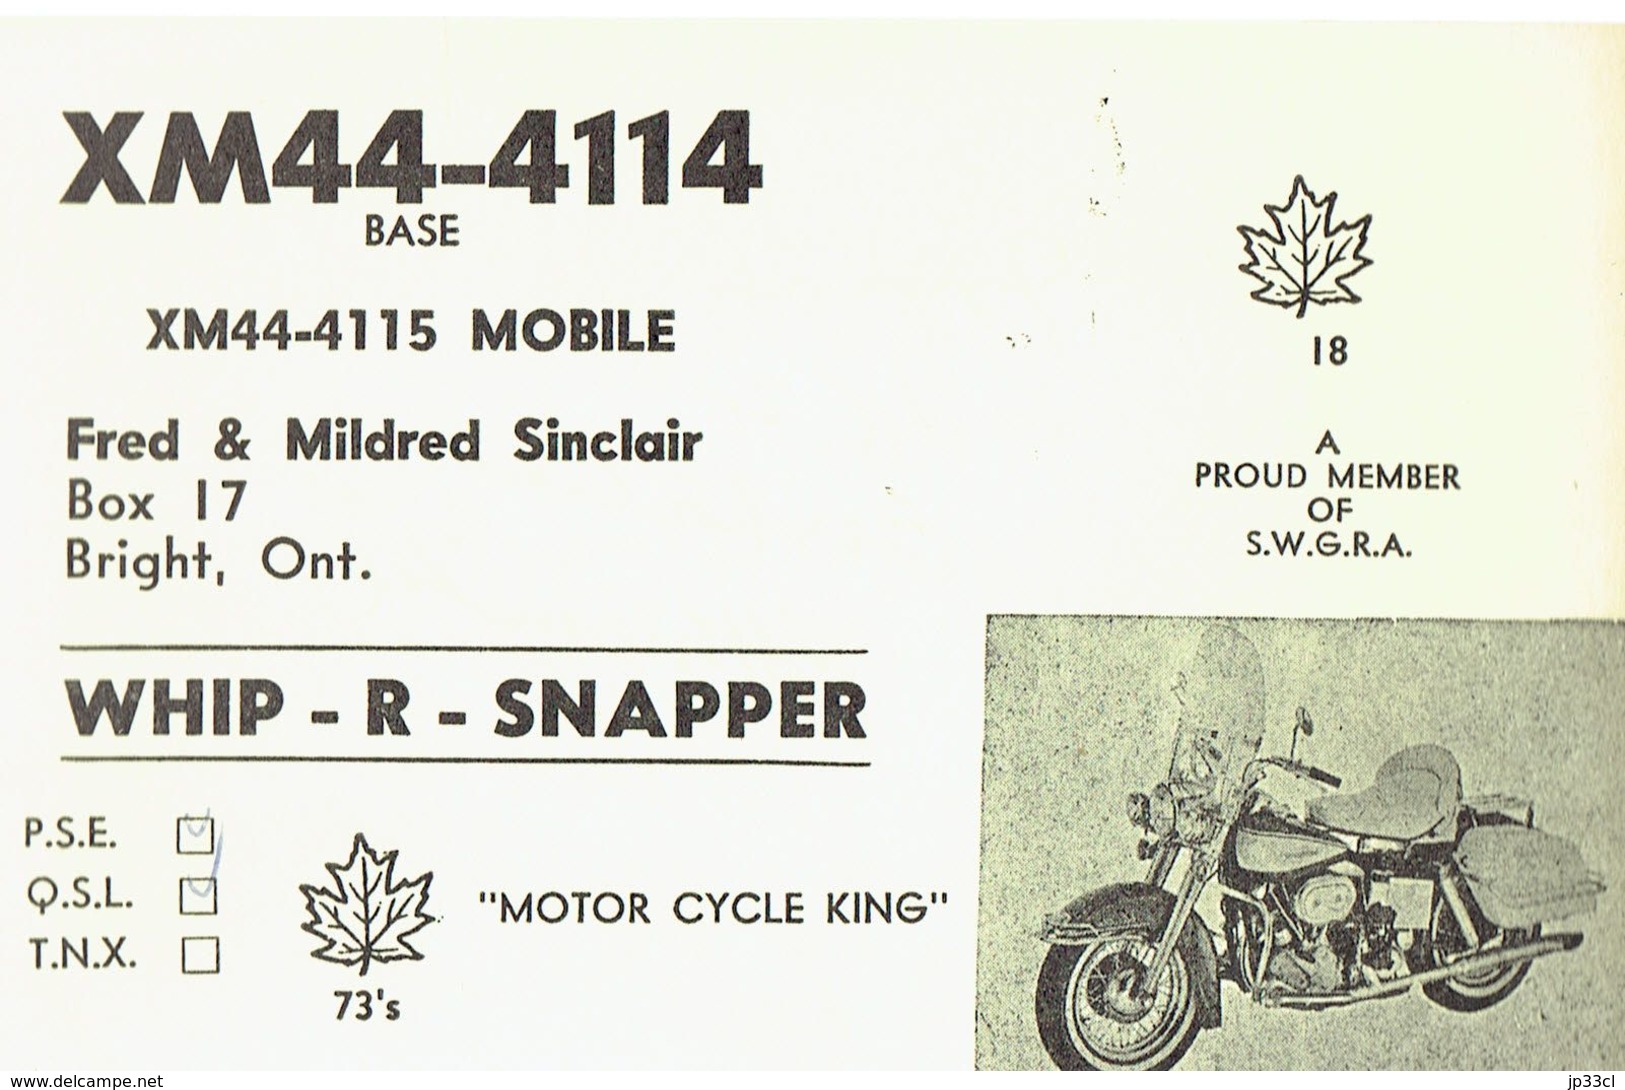 Moto Motorbike On Old QSL From Fred & Mildred Sinclair, Bright, Ontario, Canada, XM44-4114 (March 1969) - CB